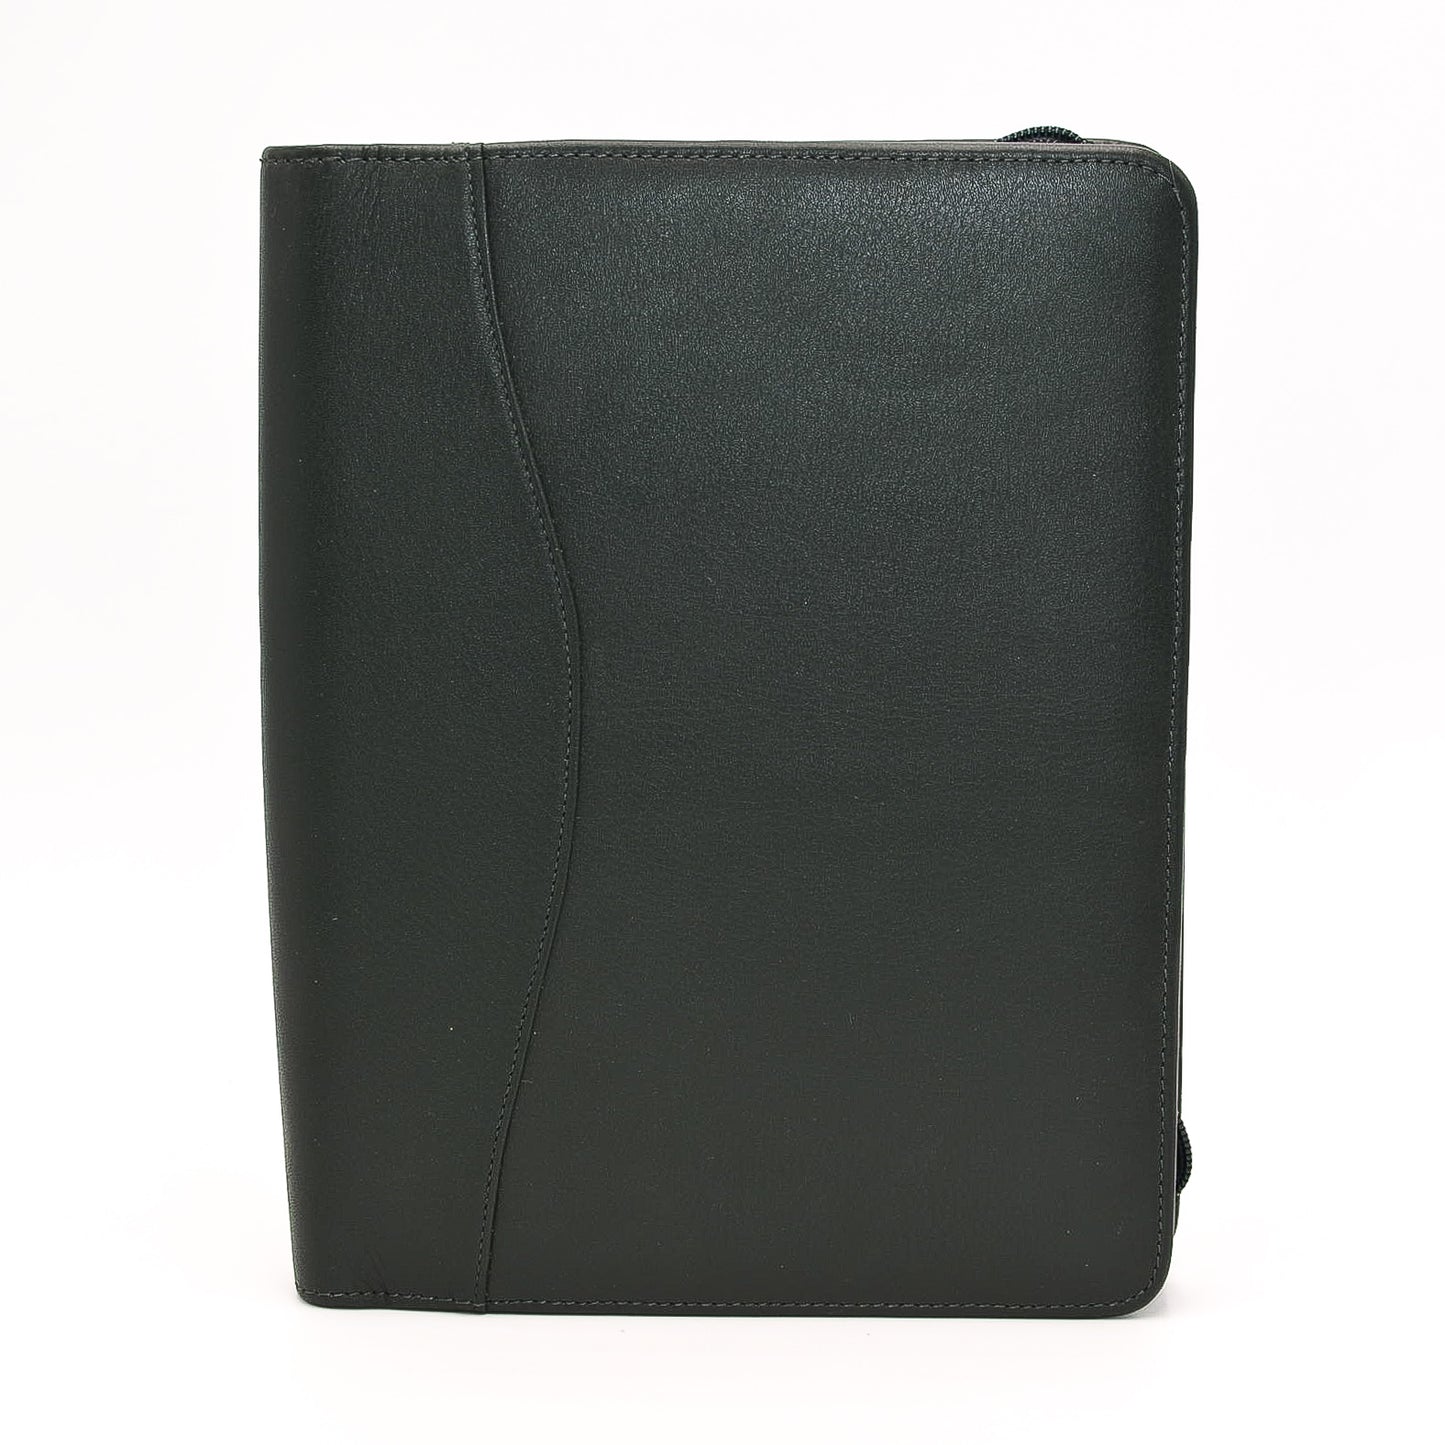 Leather: 5-3/4" x 8" Forrest Green Zippered Cover for Wirebound or 6-Hole Insert